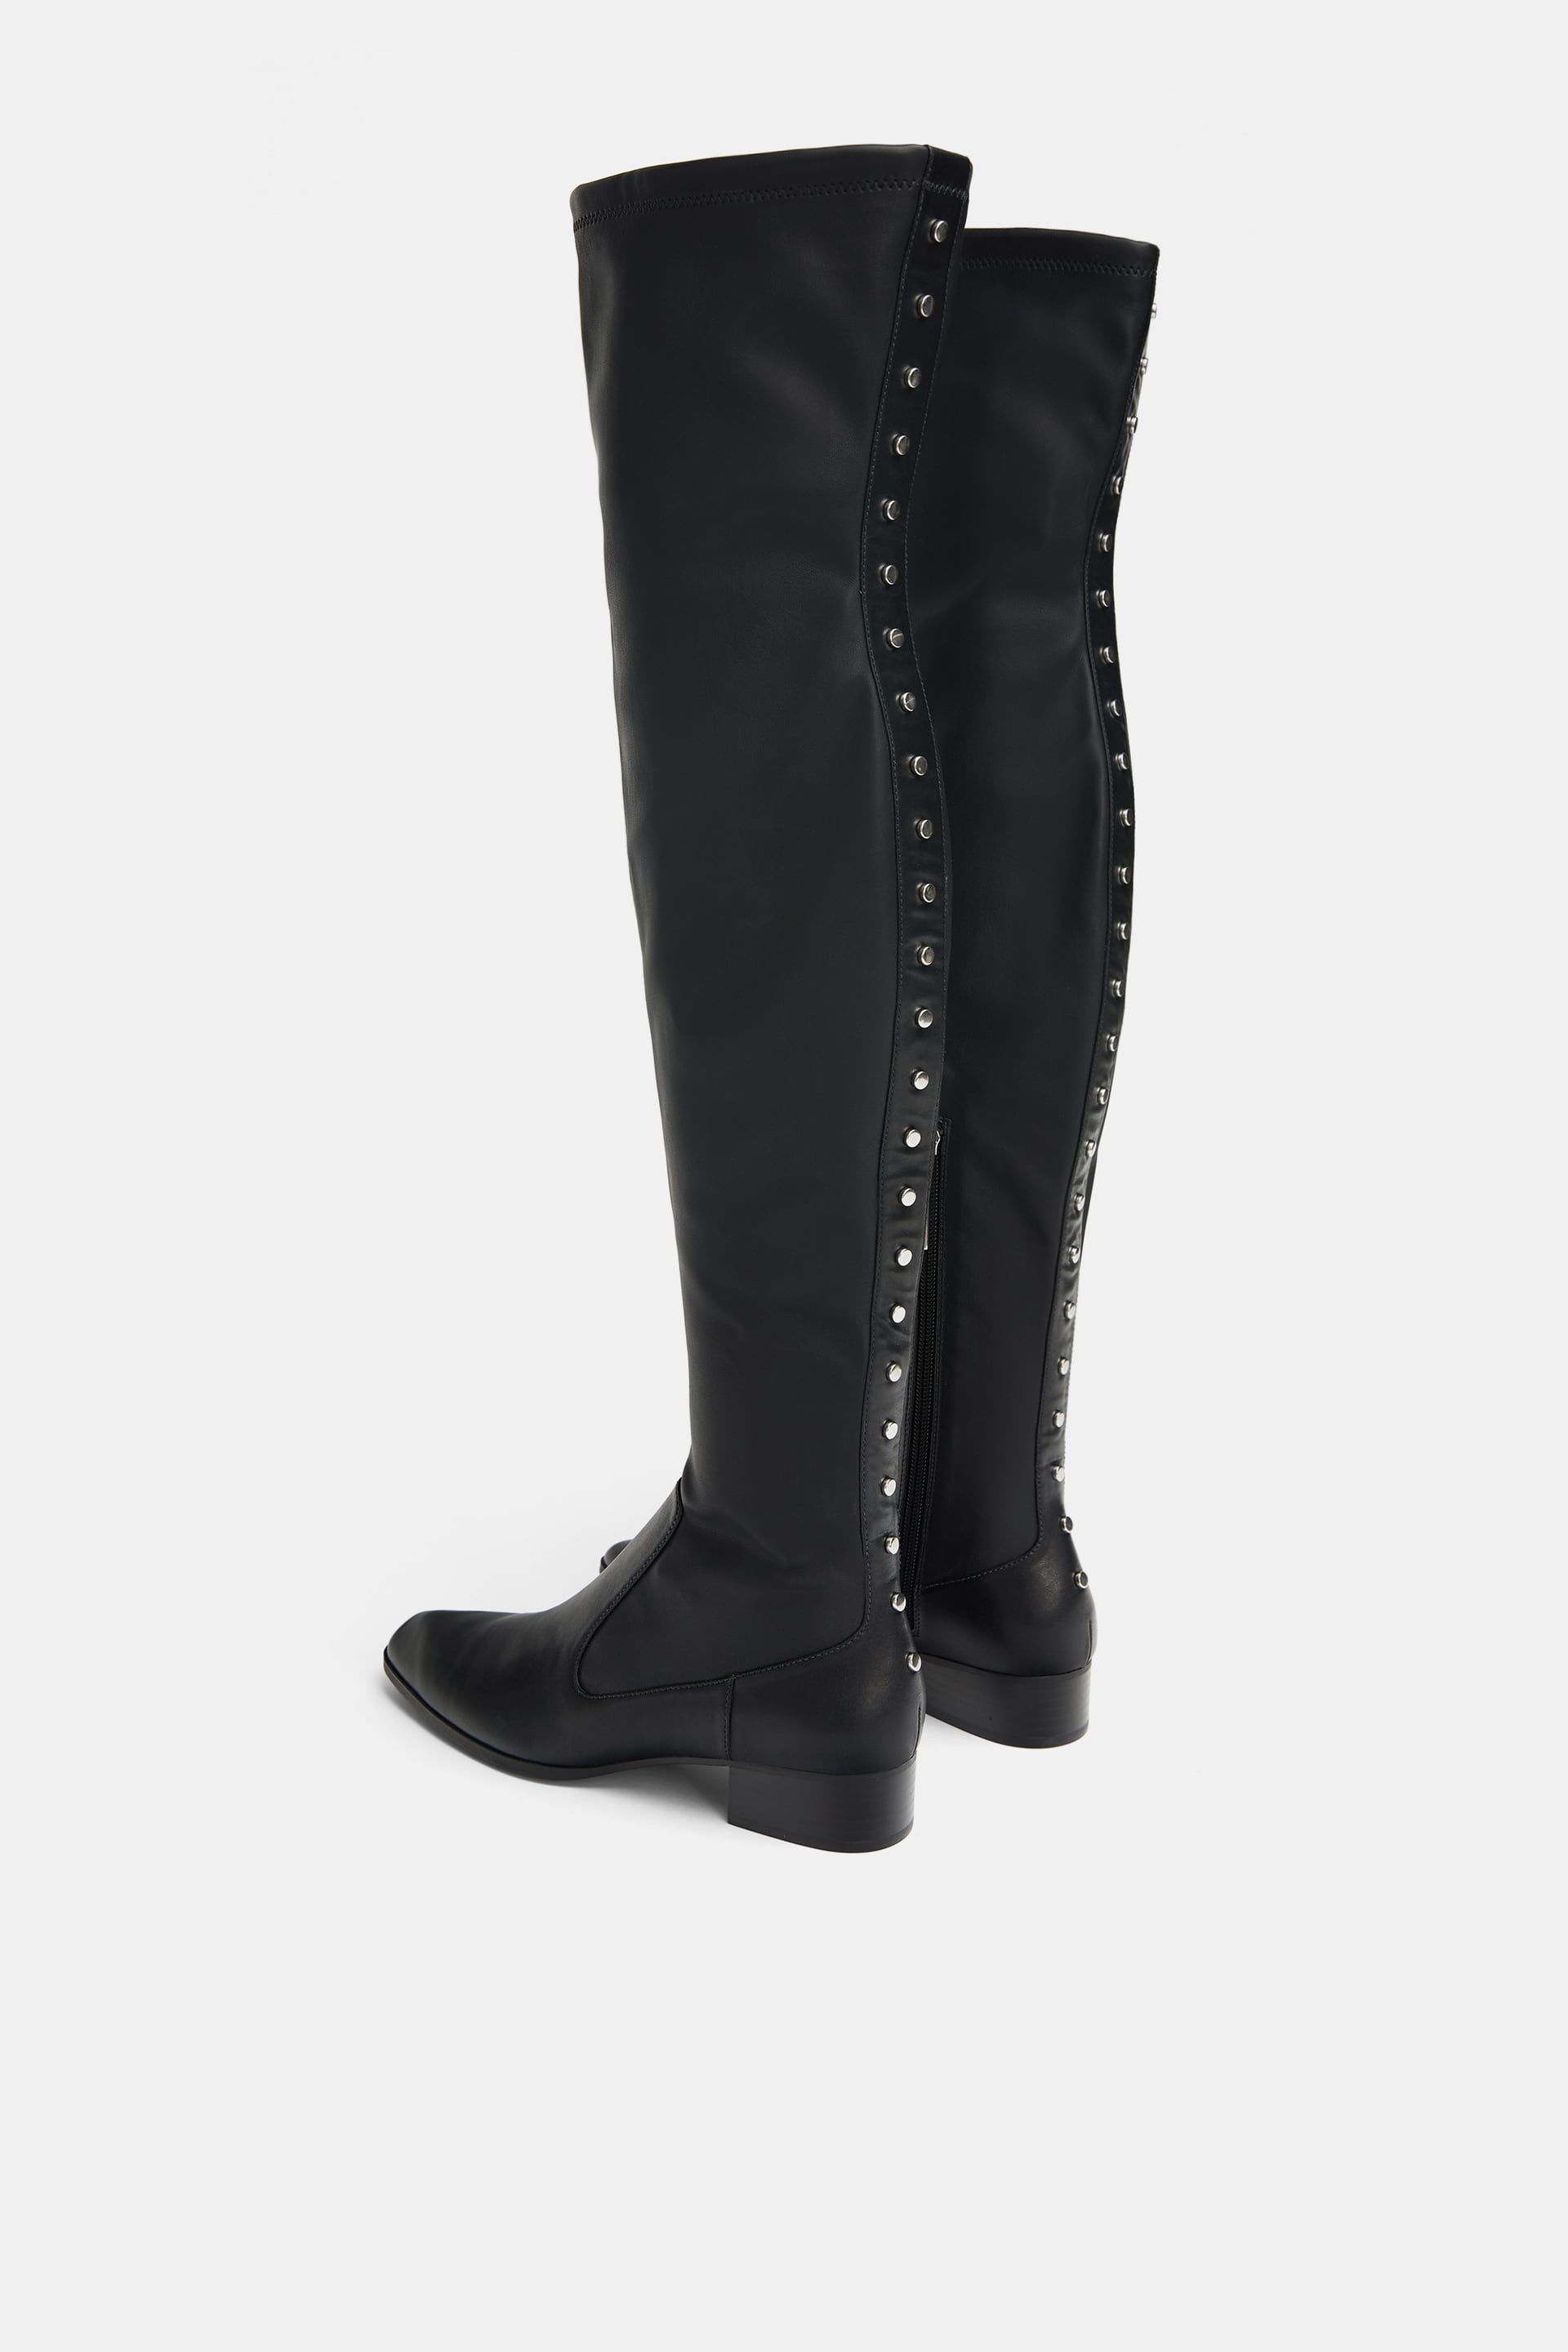 black thigh high boots for thick thighs